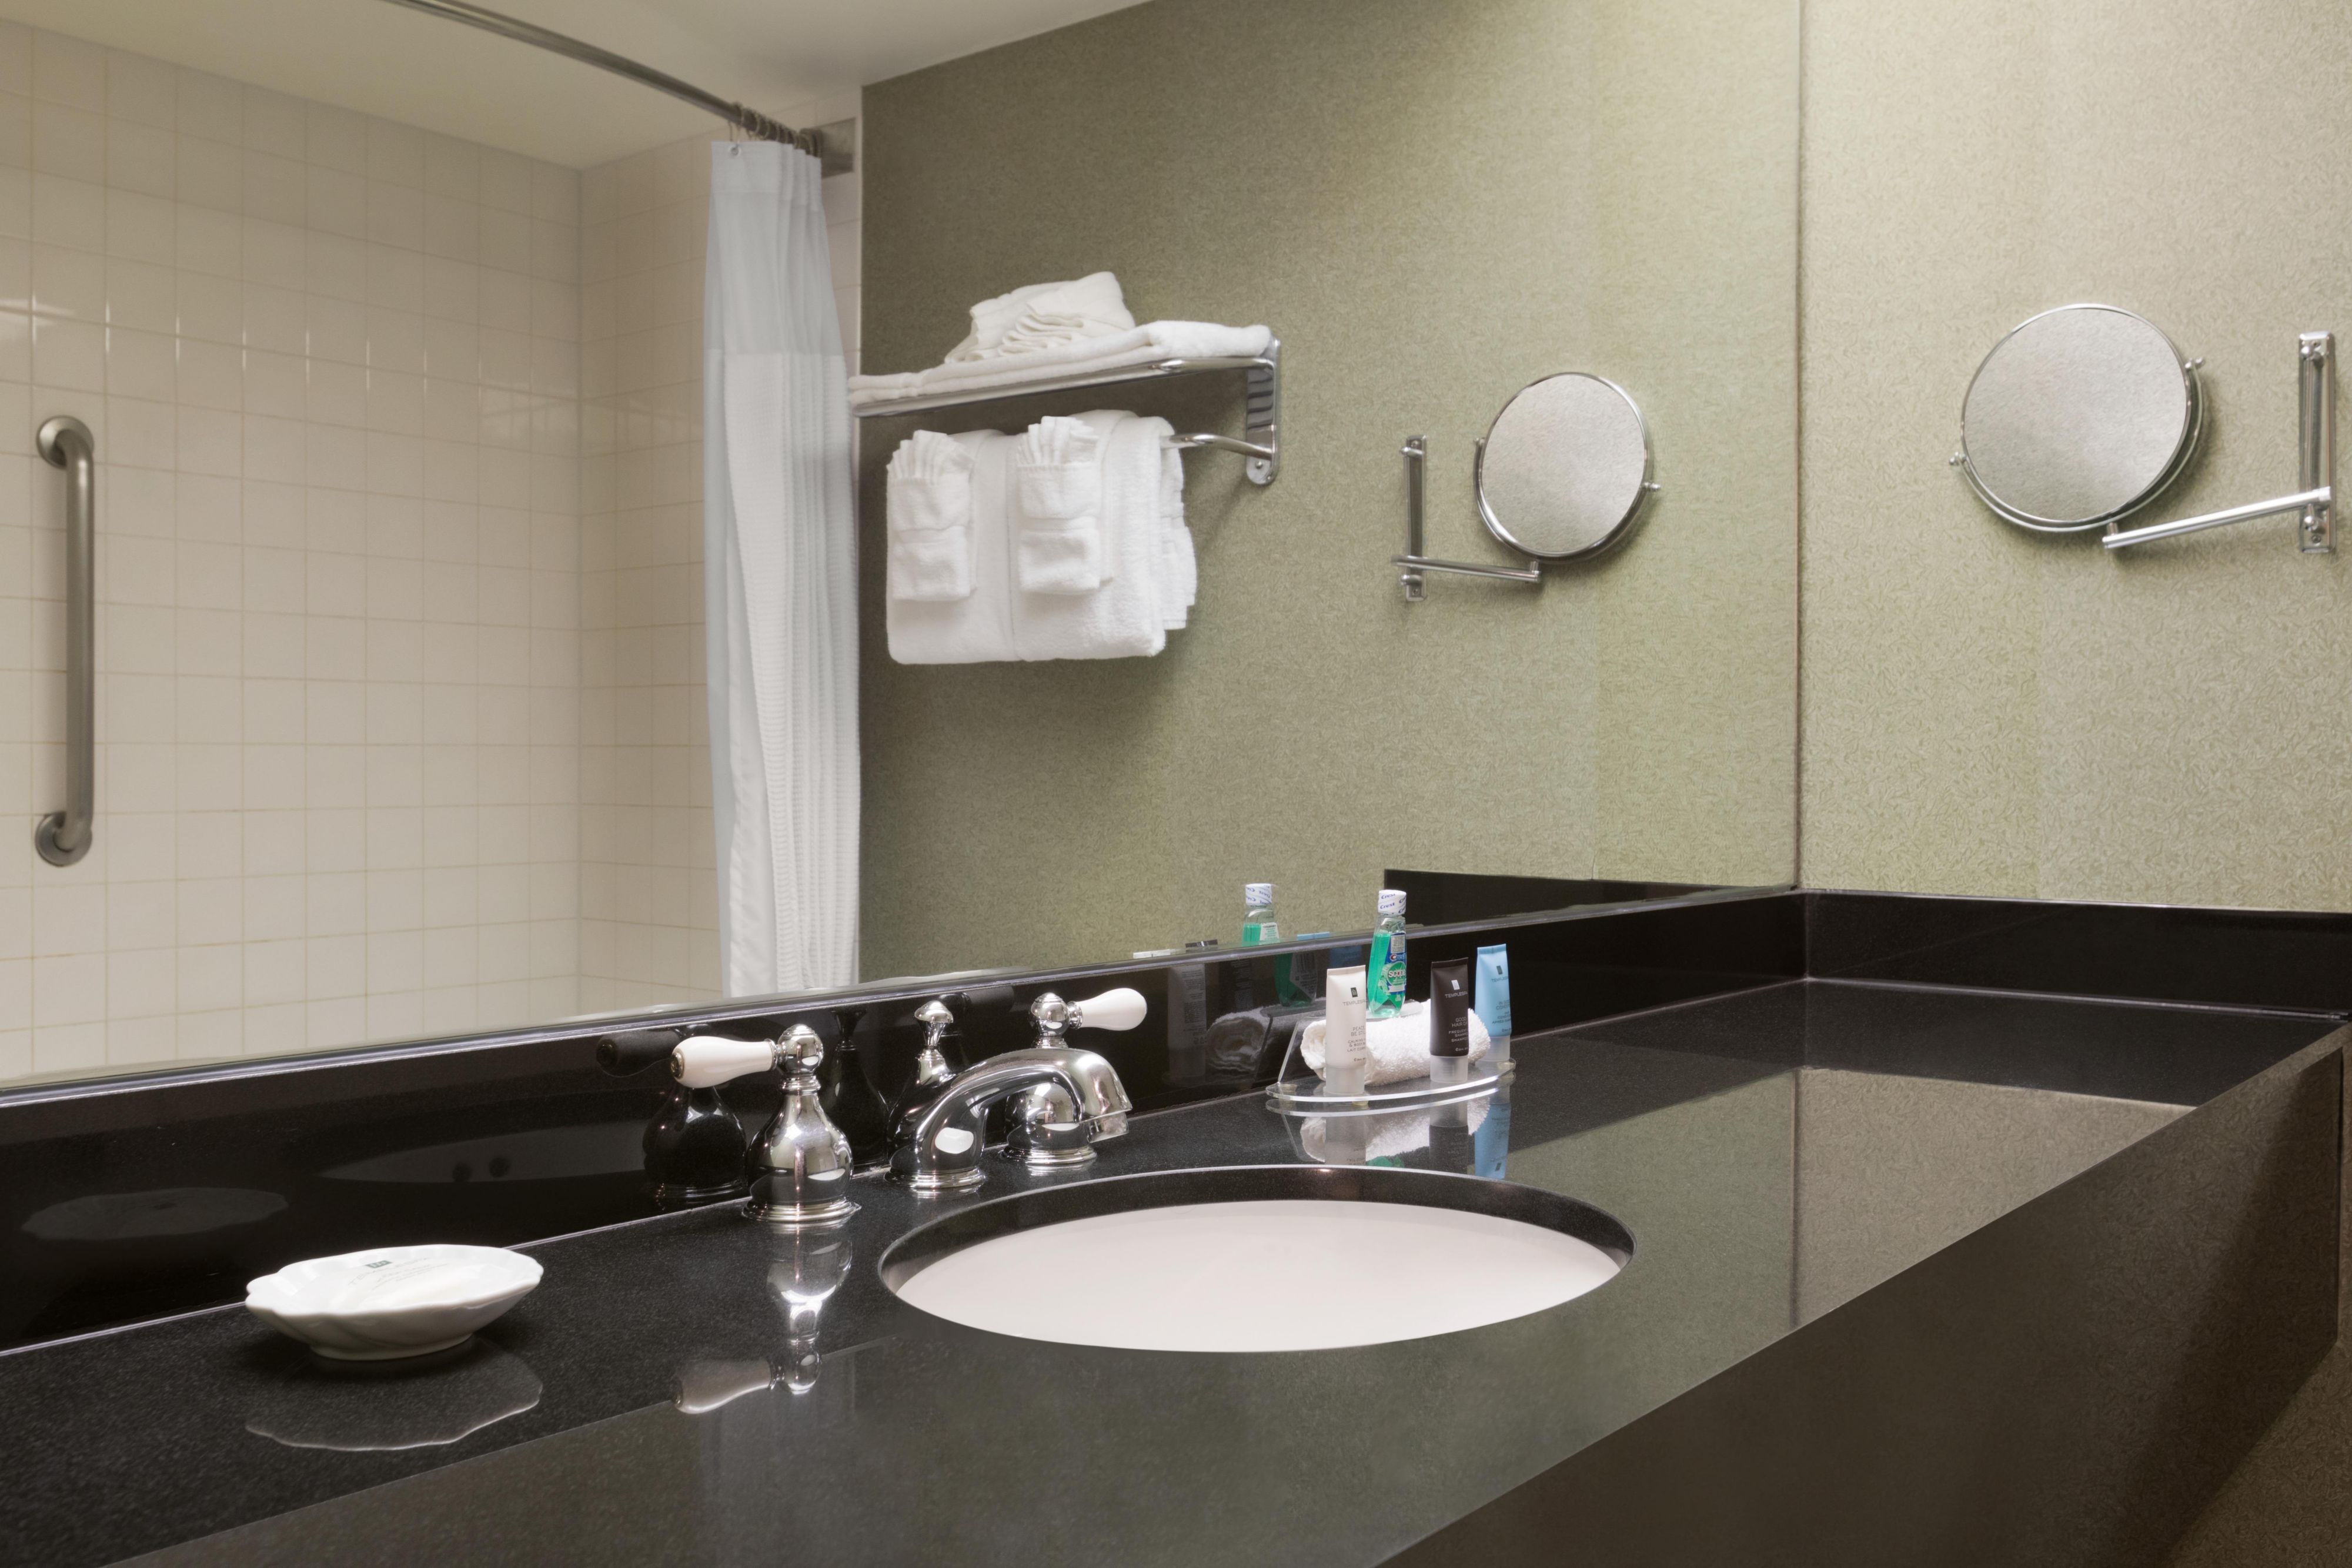 Guest bathrooms feature large, well-lit vanities and fresh linens.